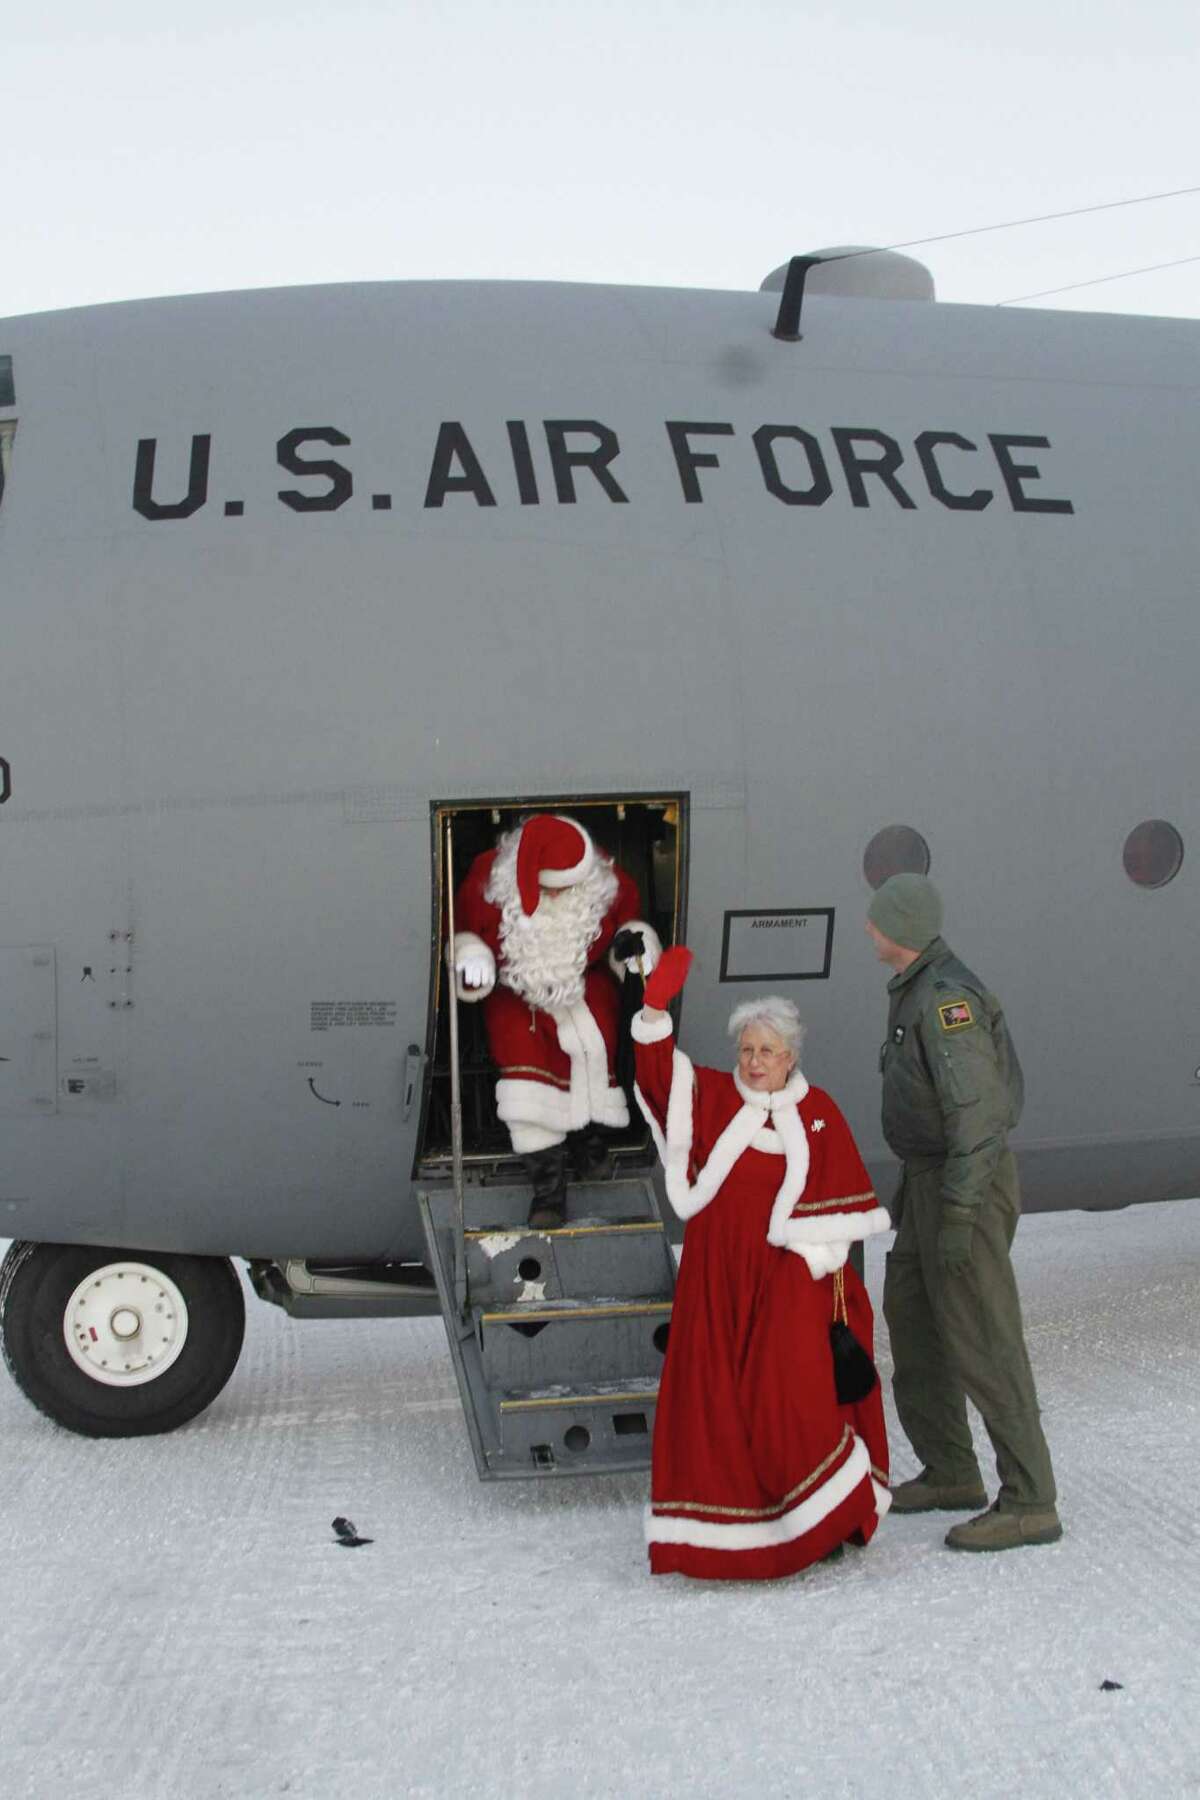 This photo taken Dec. 6, 2014, shows Santa and Mrs. Claus getting off a C130 military transport plane in Shishmaref, Alaska. The Alaska National Guard provided transport for the good Samaritan program Operation Santa, which took gifts and schools supplies to about 300 children in the Inupiat Eskimo community. (AP Photo/Mark Thiessen)